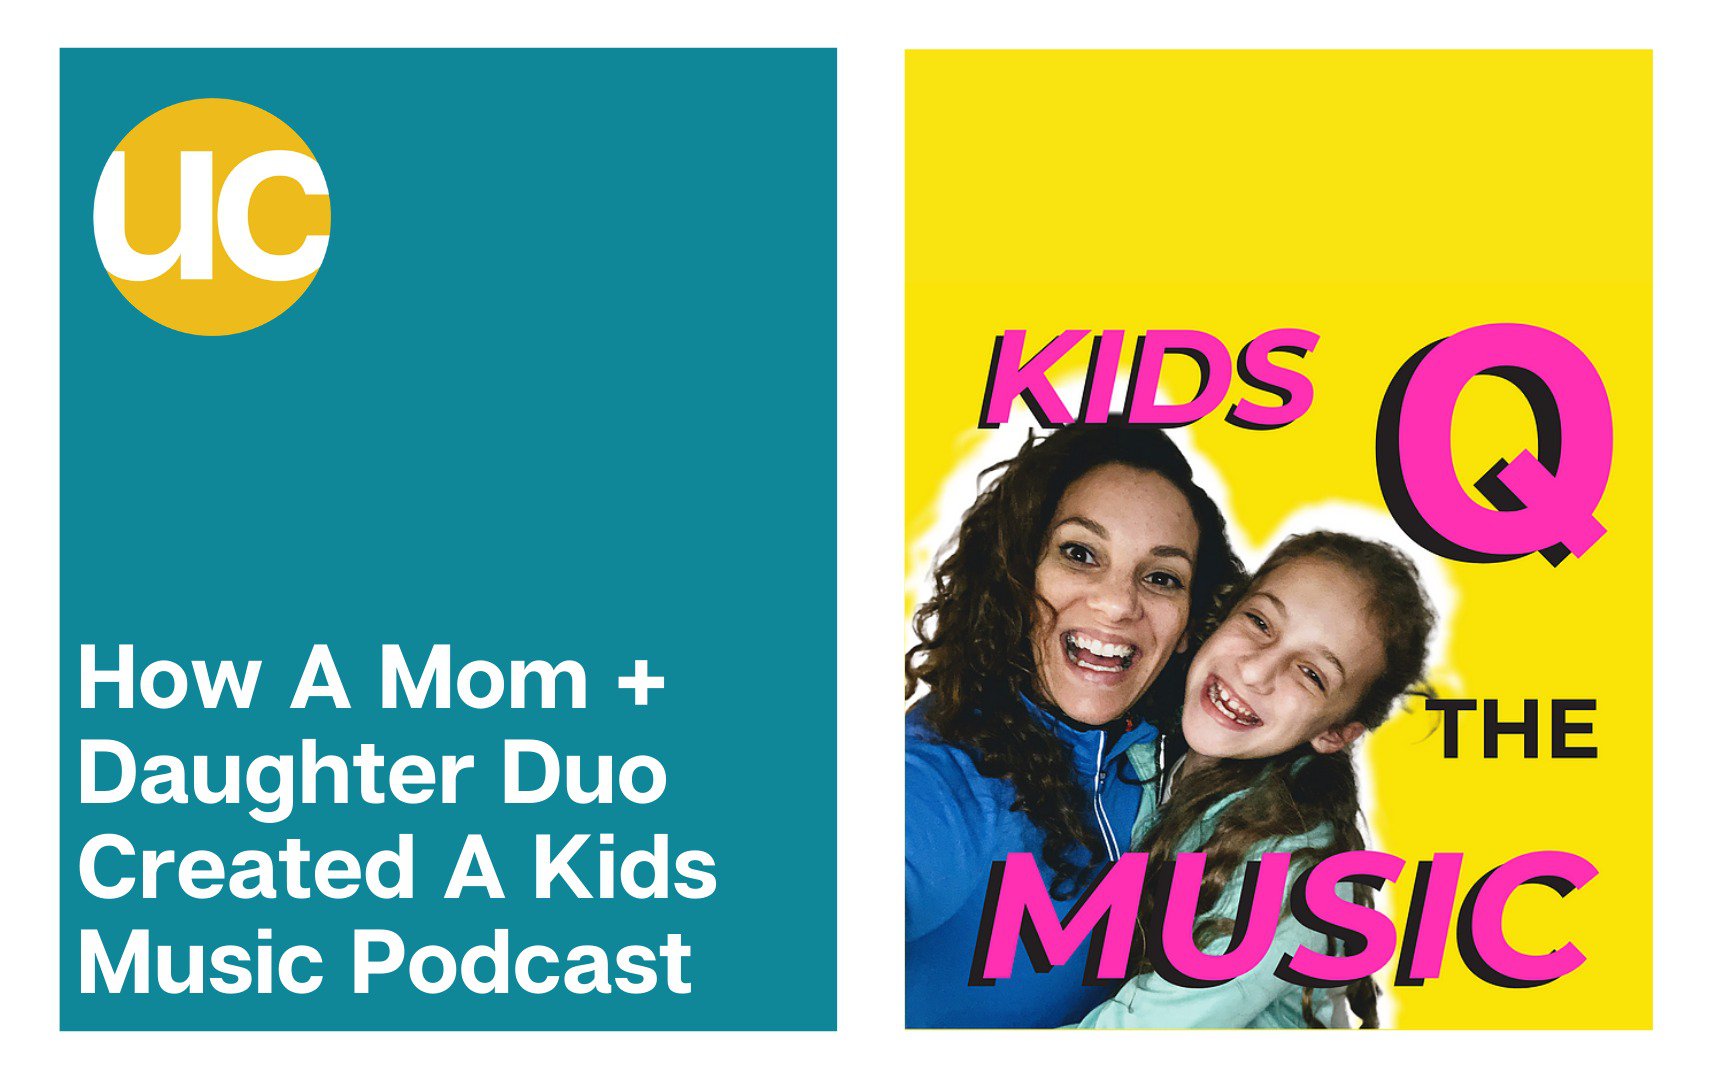 How A Mom + Daughter Duo Created A Kids Music Podcast